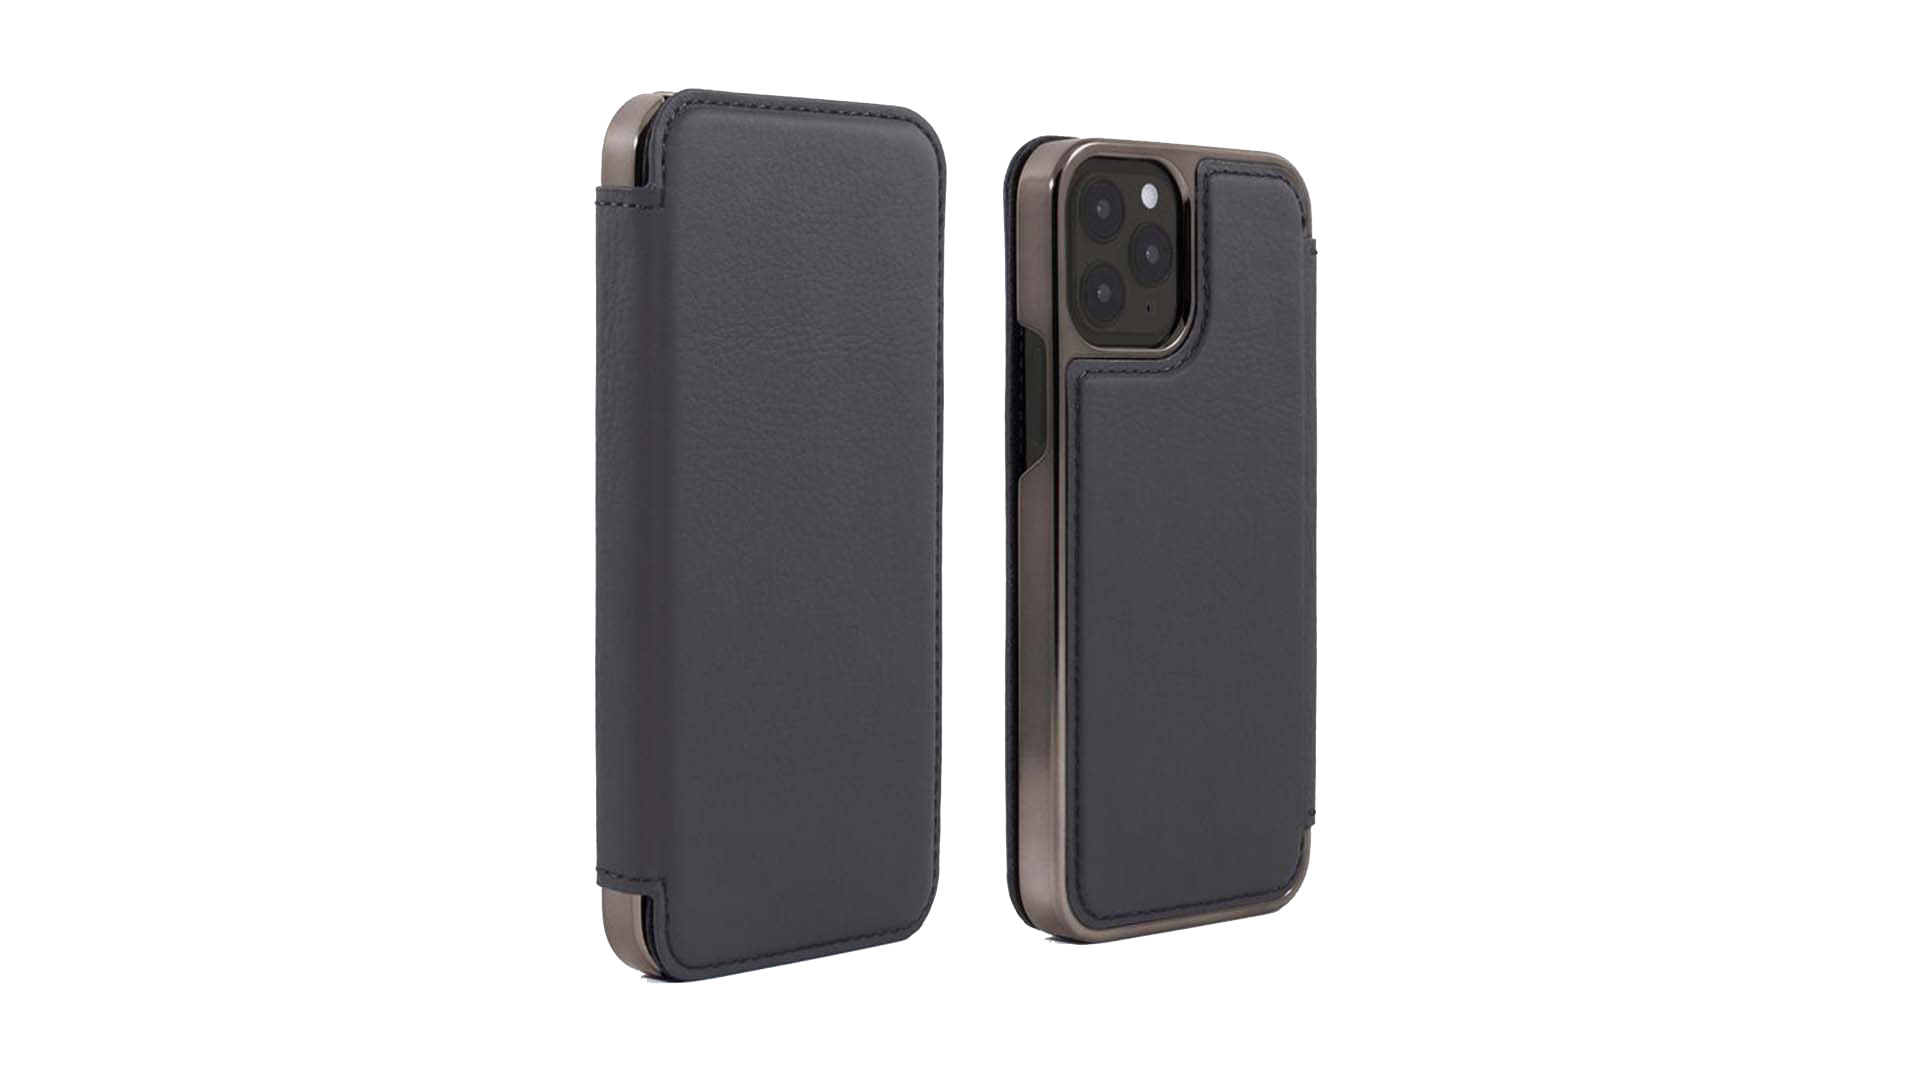 An example of one of the best iPhone 13 Pro cases